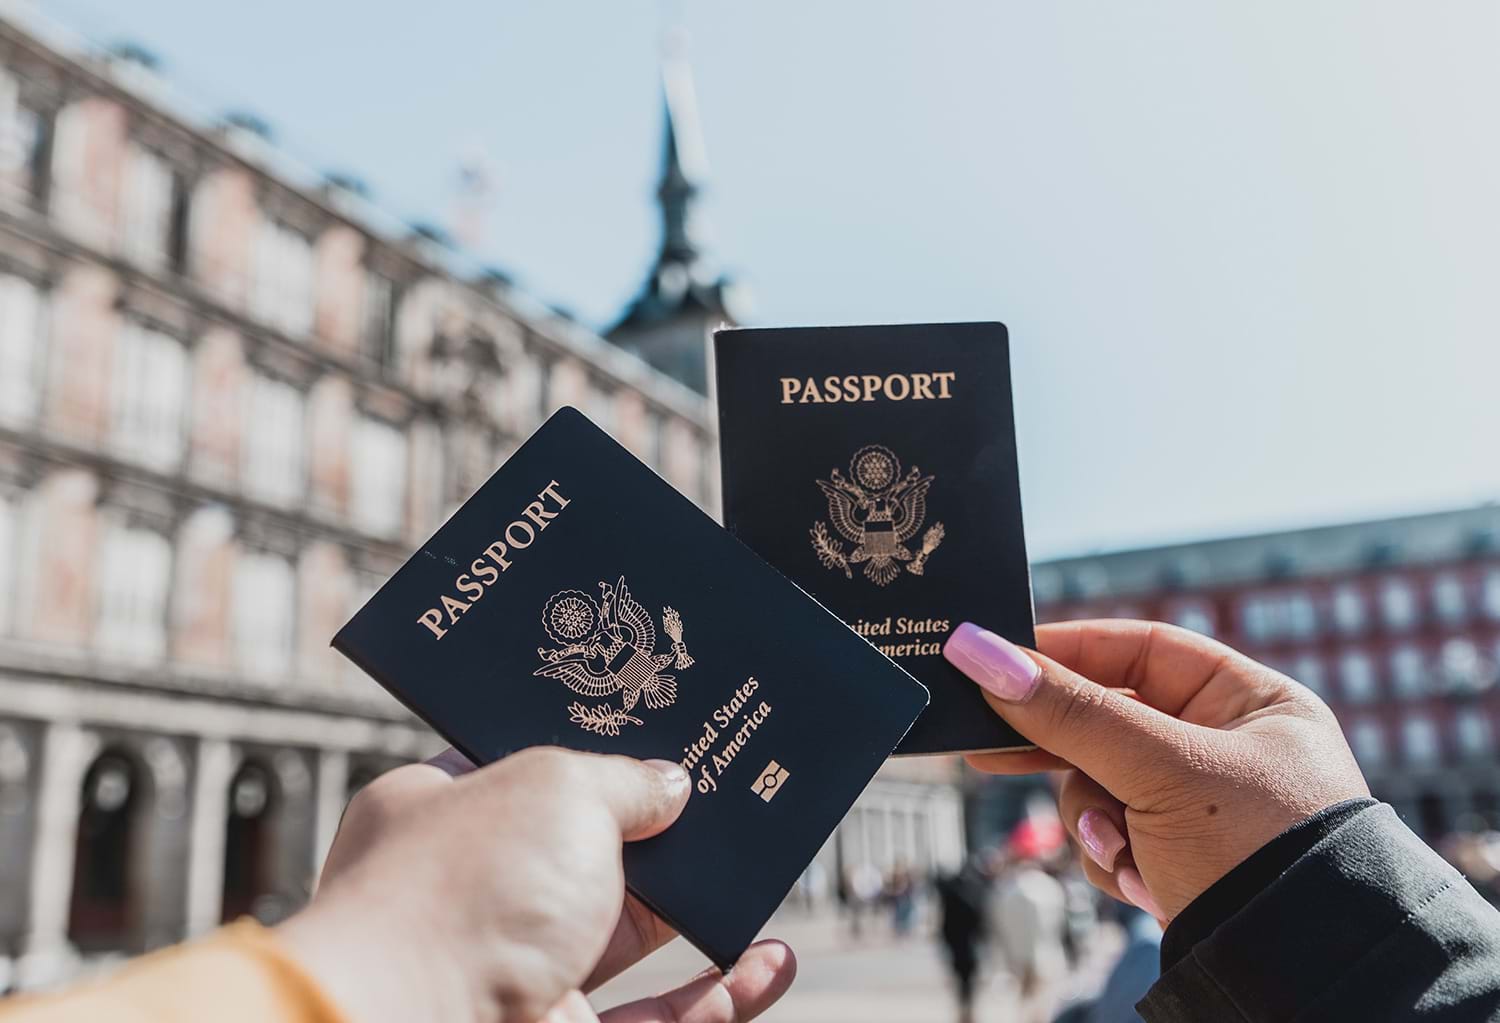 Two people holding passports in city courtyard